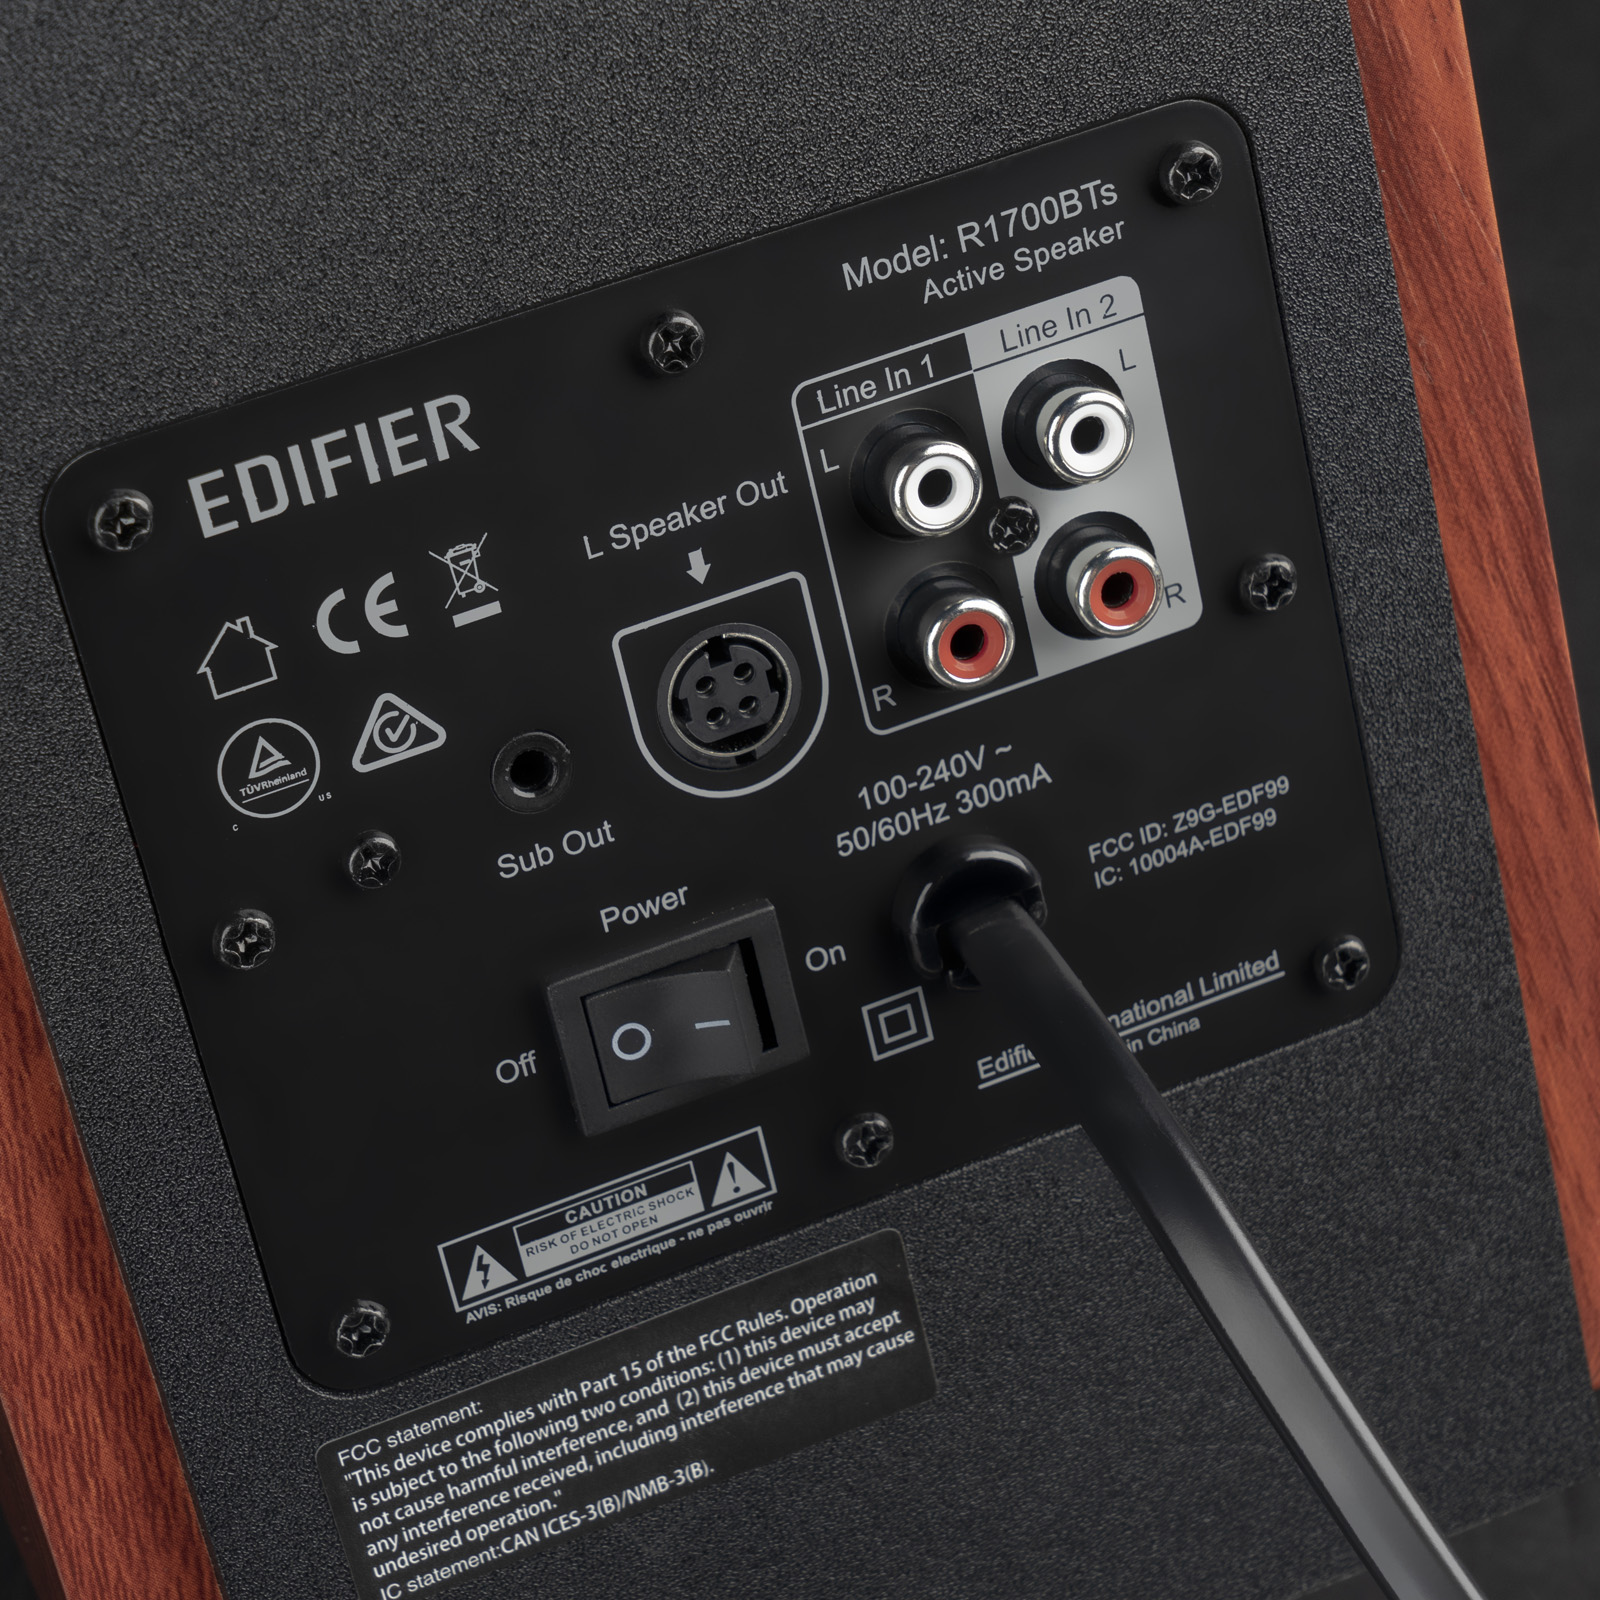 Edifier R1700BTs Active Bookshelf Speakers - Bluetooth v5.0, 2.0 Wireless Near Field Studio Monitor Speaker - 66w RMS with Subwoofer Line Out - Wooden Enclosure - image 2 of 7